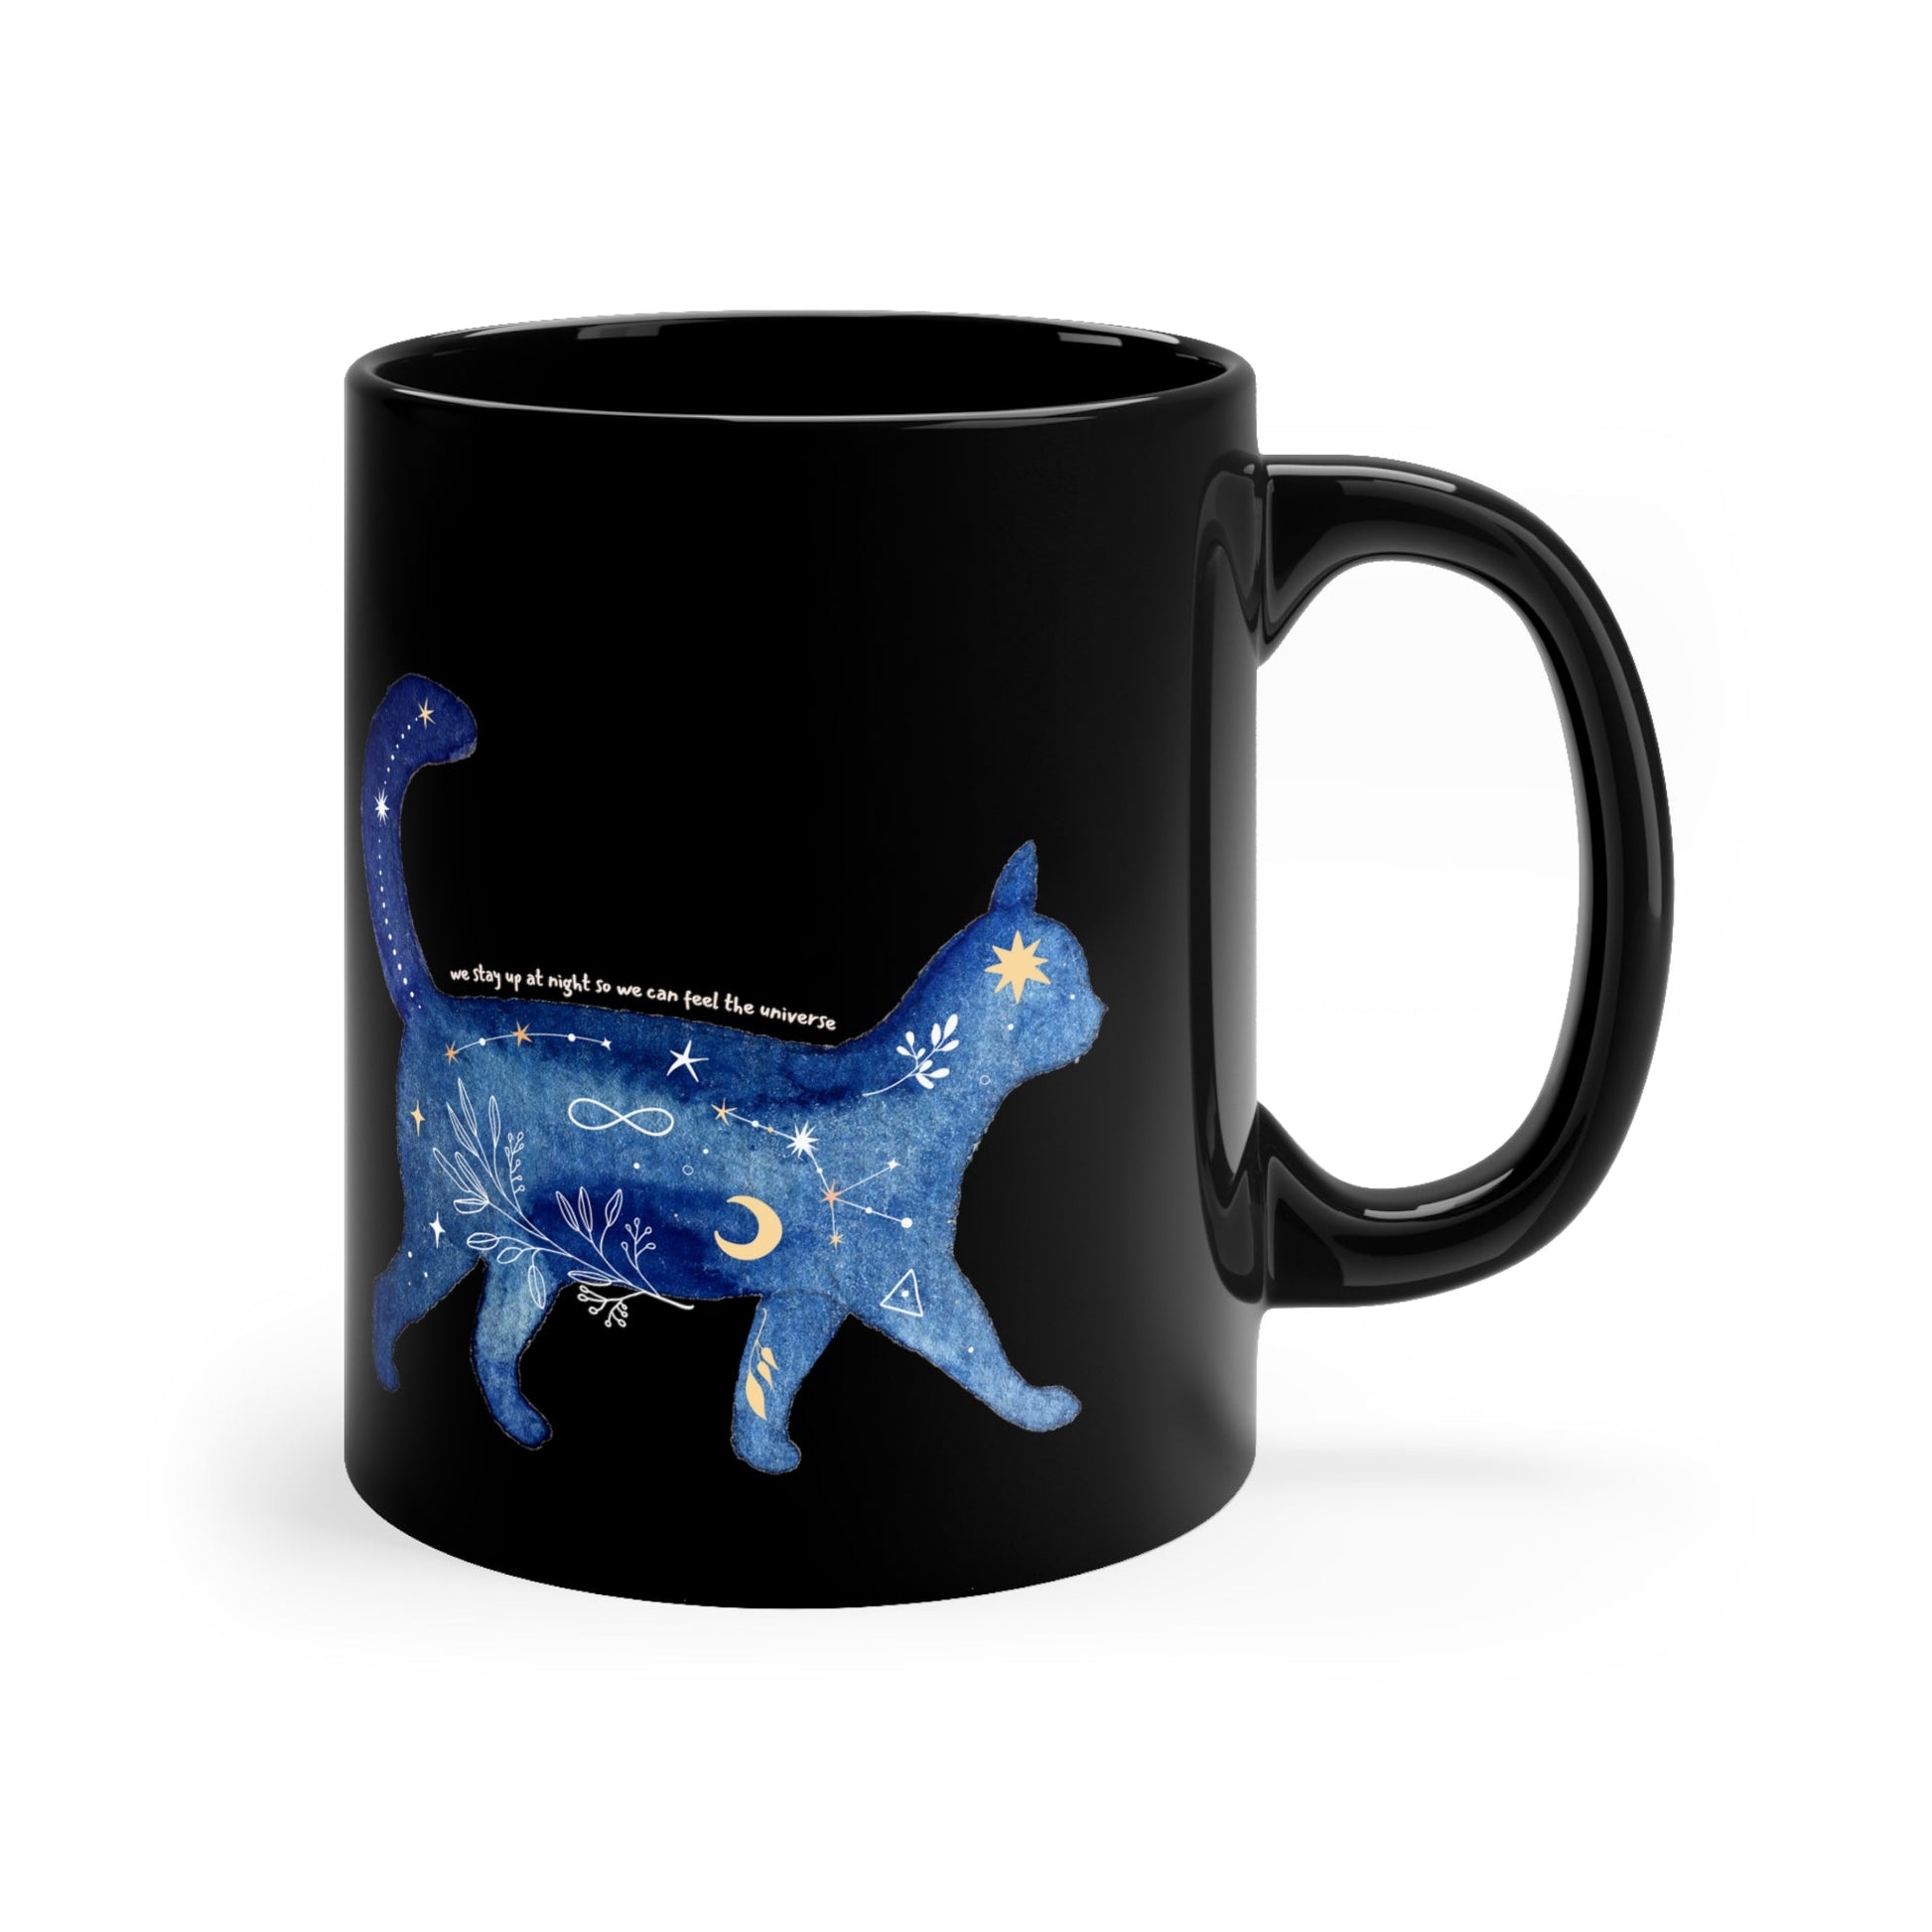 We Stay Up At Night So We Can Feel The Universe 11oz Black Mug